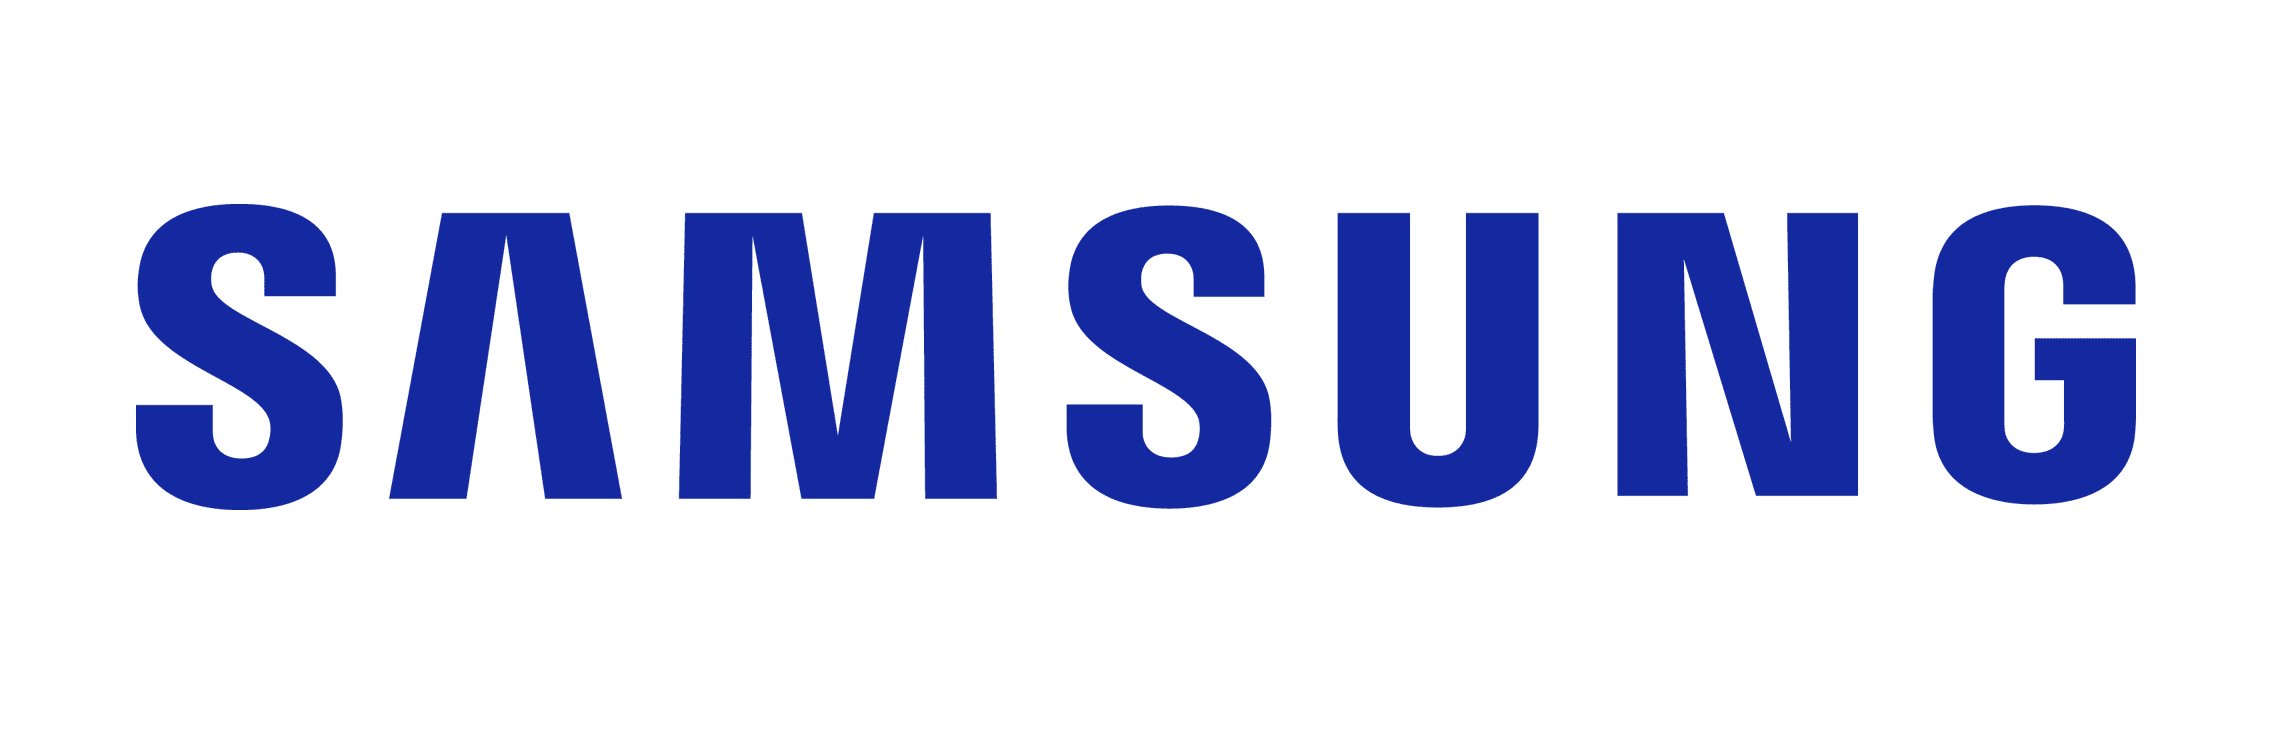 Samsung logo in blue uppercase letters on a white background.